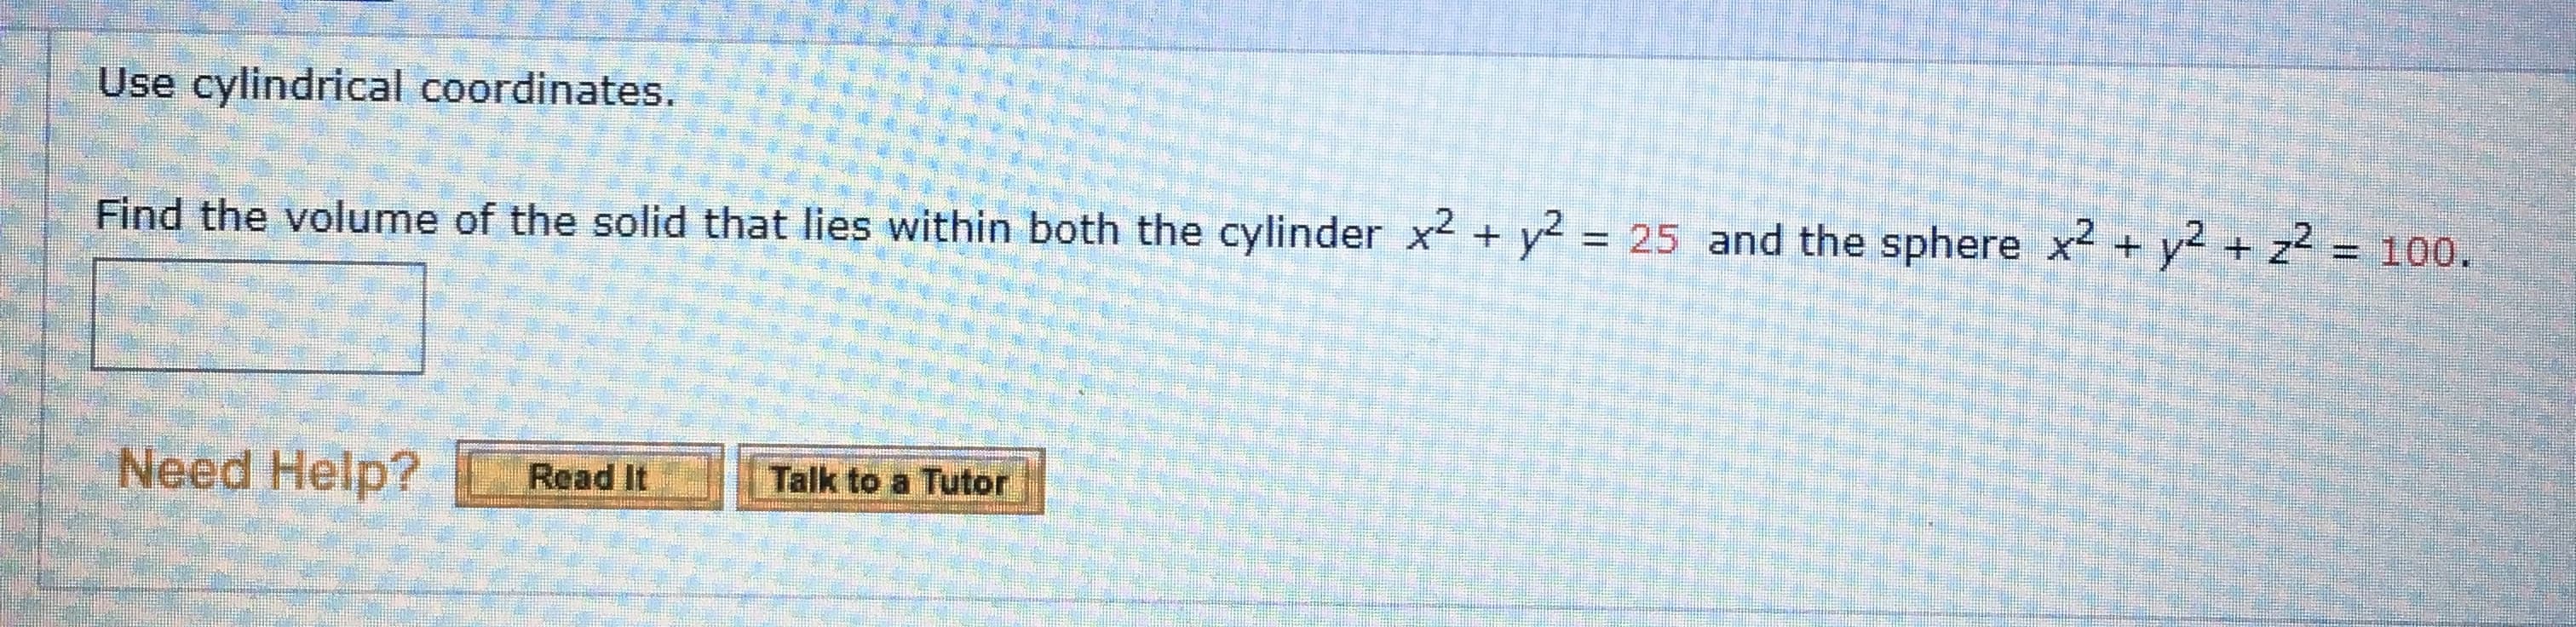 Use cylindrical coordinates.
Find the volume of the solid that lies within both the cylinder x2 + y2 = 25 and the sphere x2 + y2 + z2 = 100.
Need Help?
Read It Talk to a Tutor
